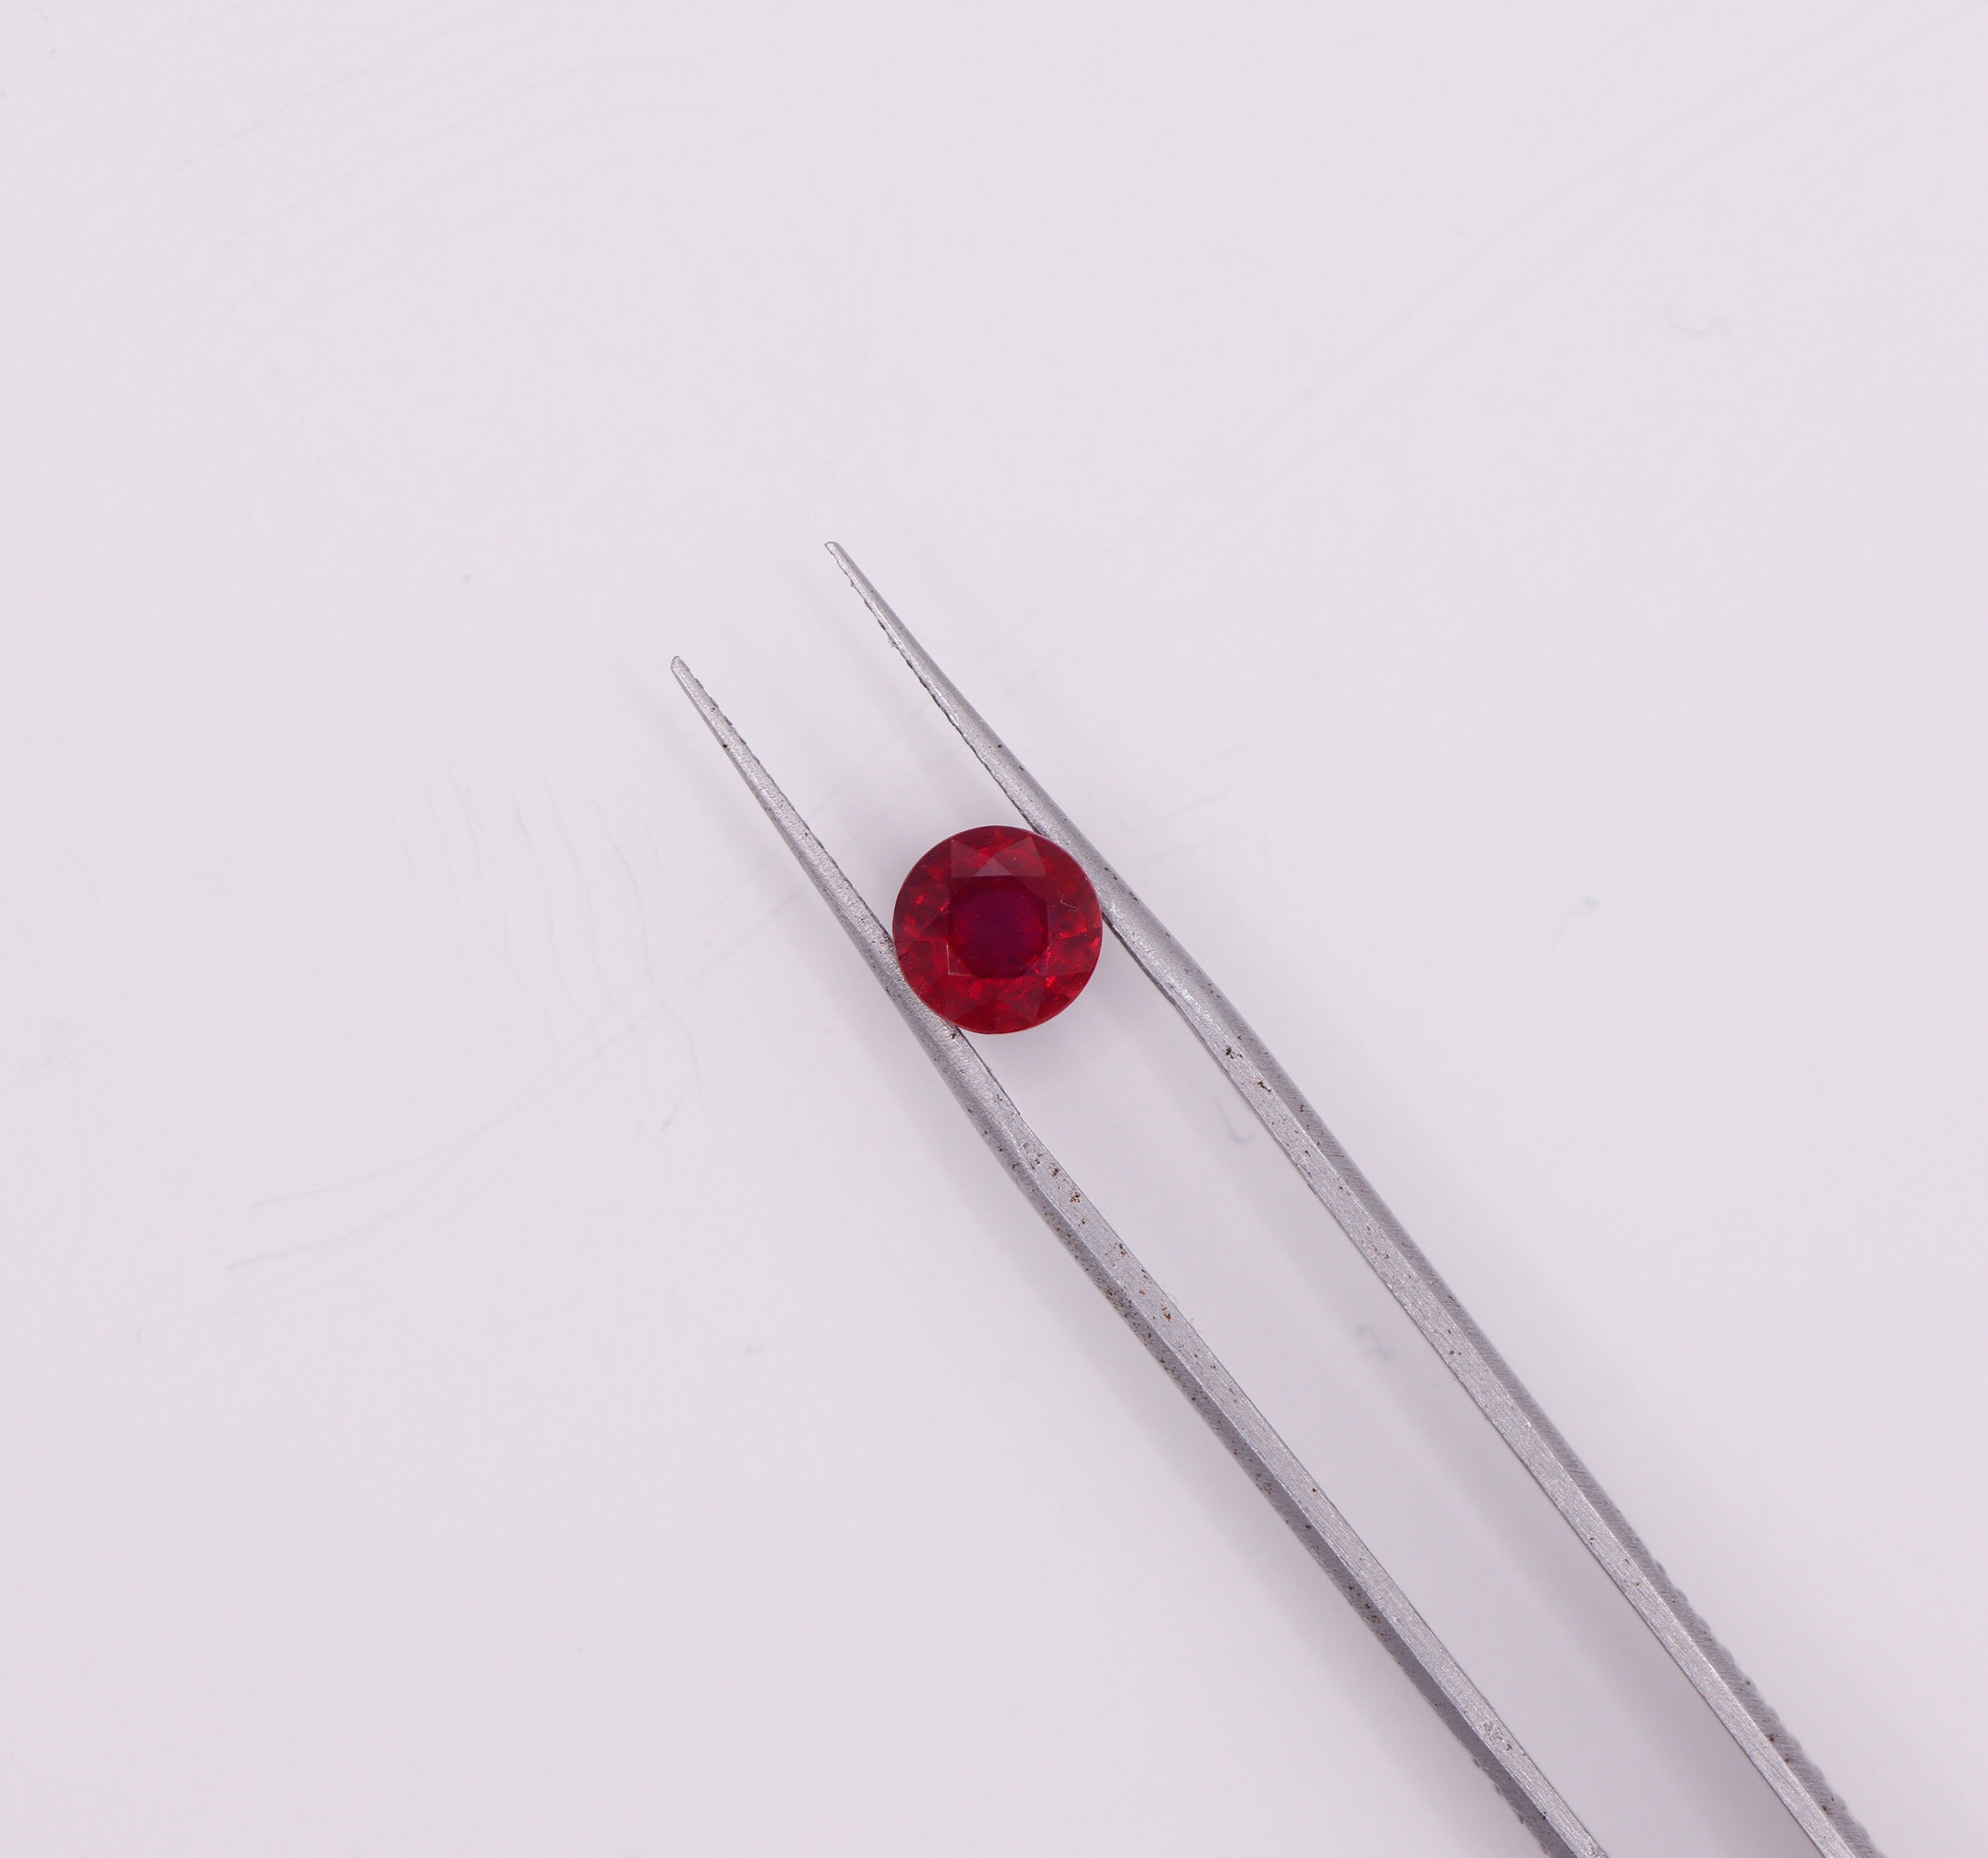 Gemstones-Natural Ruby Loose Gemstones | Round | 5mm 6mm 7mm 8mm 9mm 10mm | Pigeon Blood Red | Jewelry Stone Setting | Fissure Filled | Certified - NNJGemstones